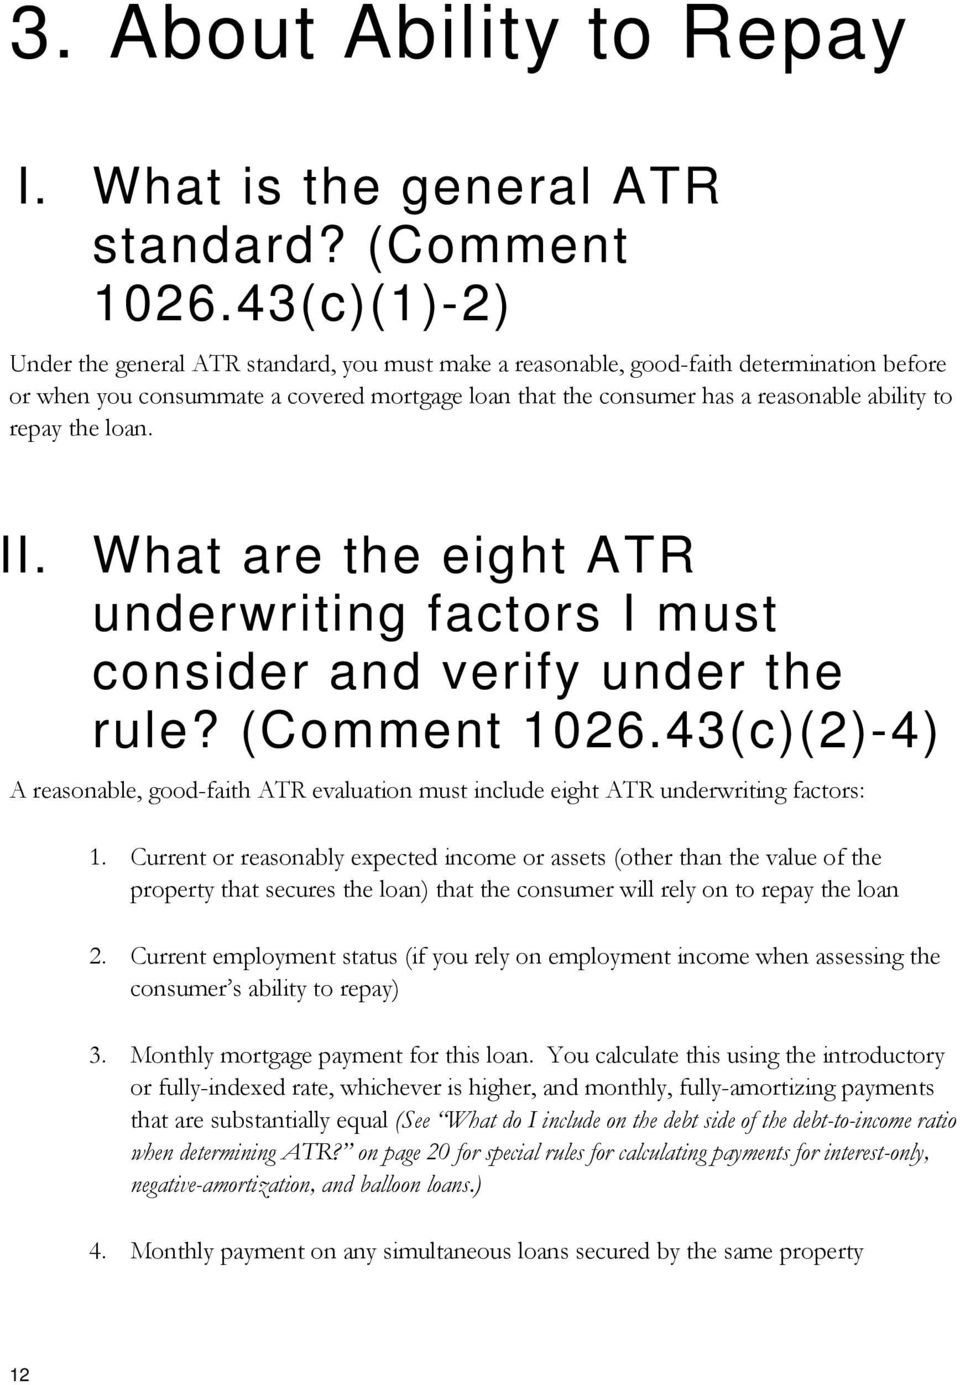 repay the loan. II. What are the eight ATR underwriting factors I must consider and verify under the rule? (Comment 1026.